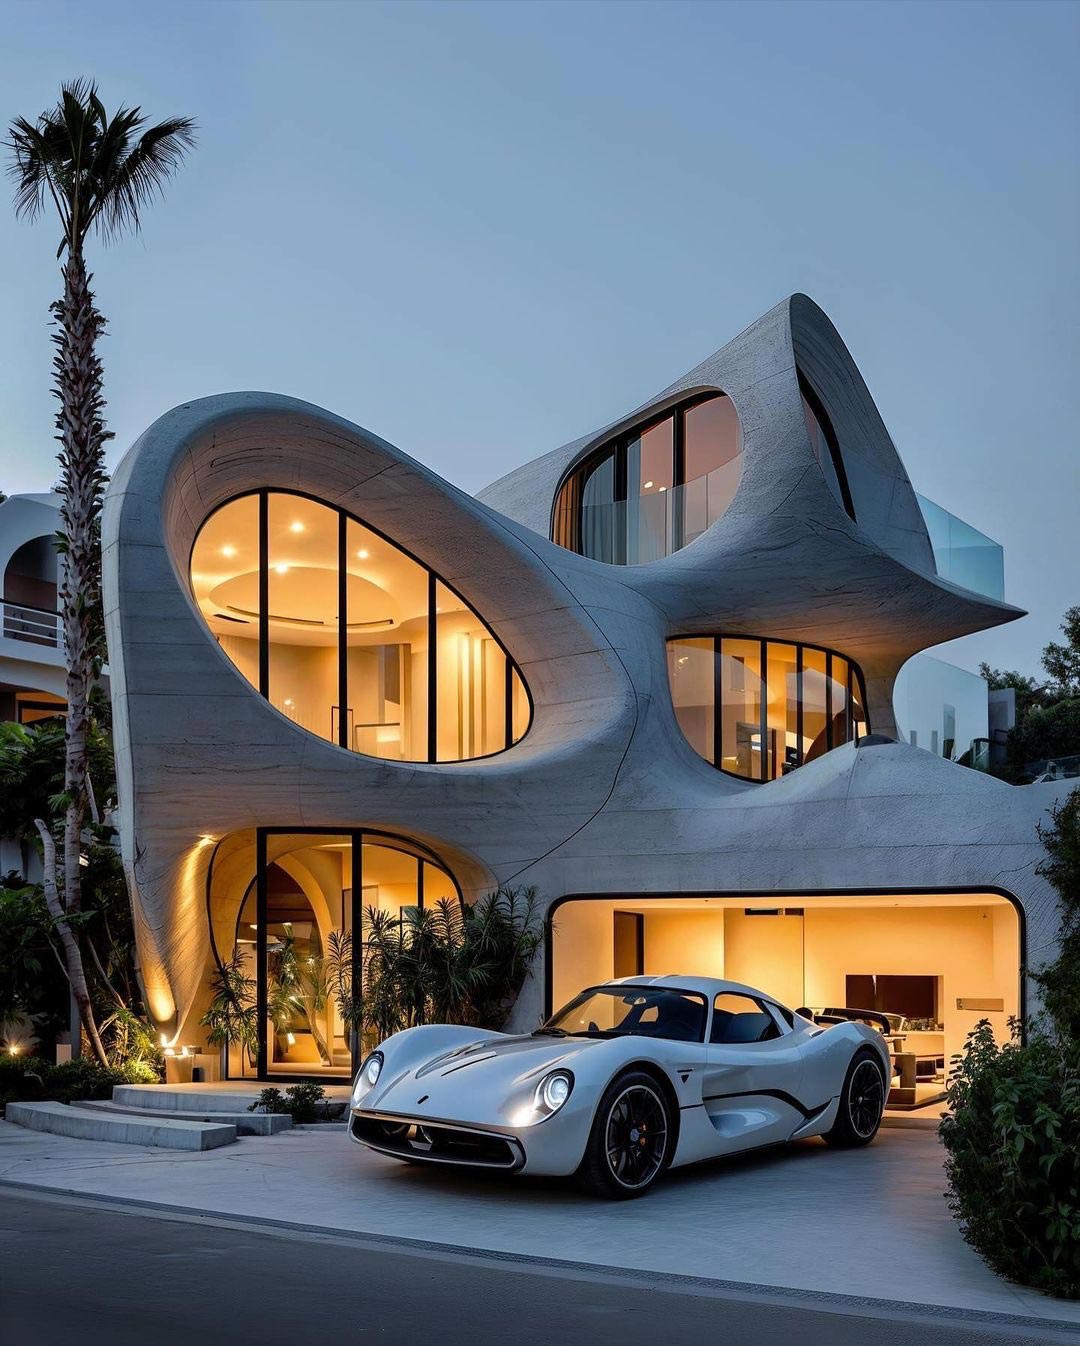 Abstract-Shaped Home Design Front entrance with sports car in drive-way